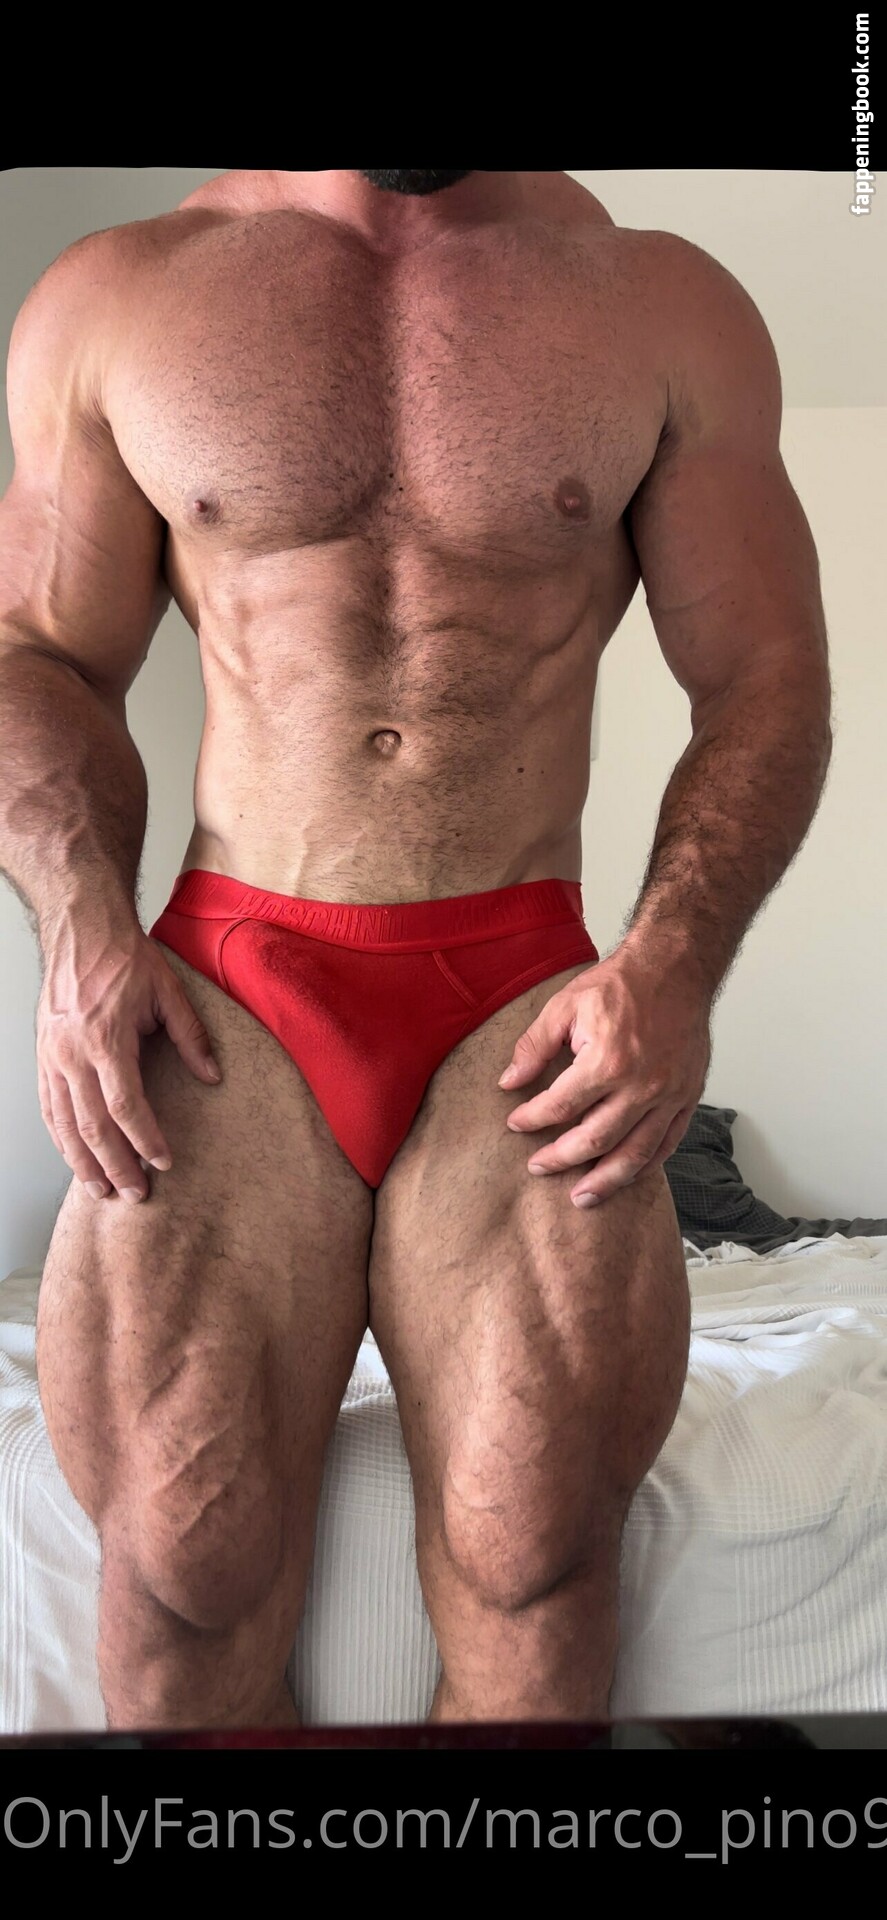 marco_pino91 Nude OnlyFans Leaks